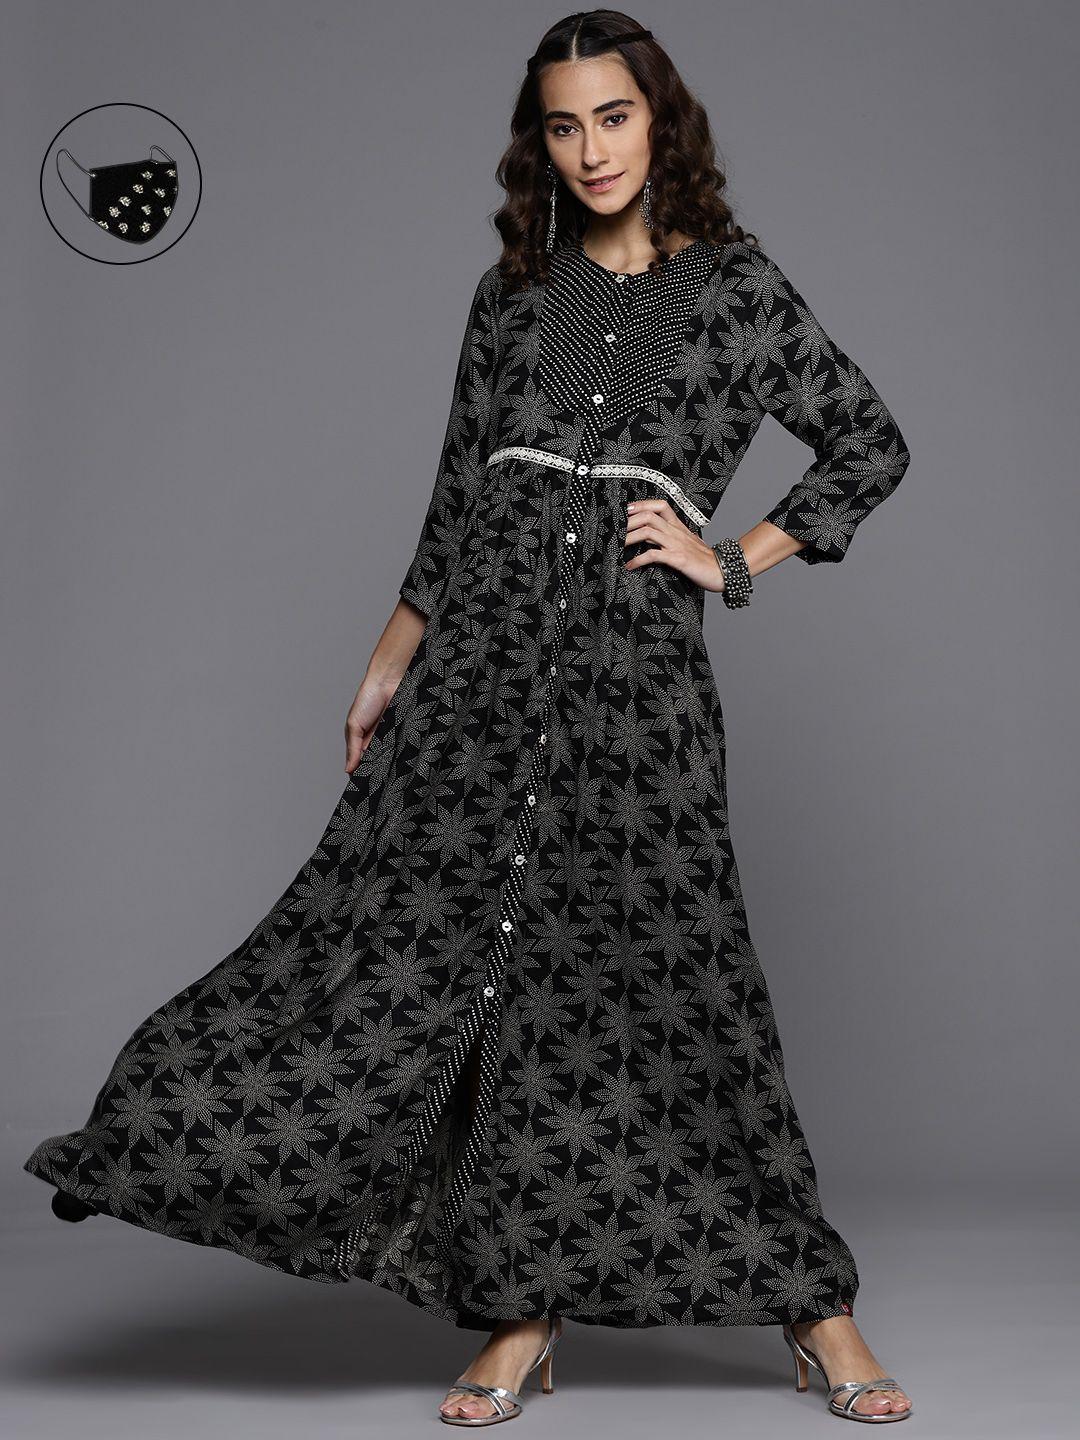 biba black & white floral printed maxi dress comes with a mask